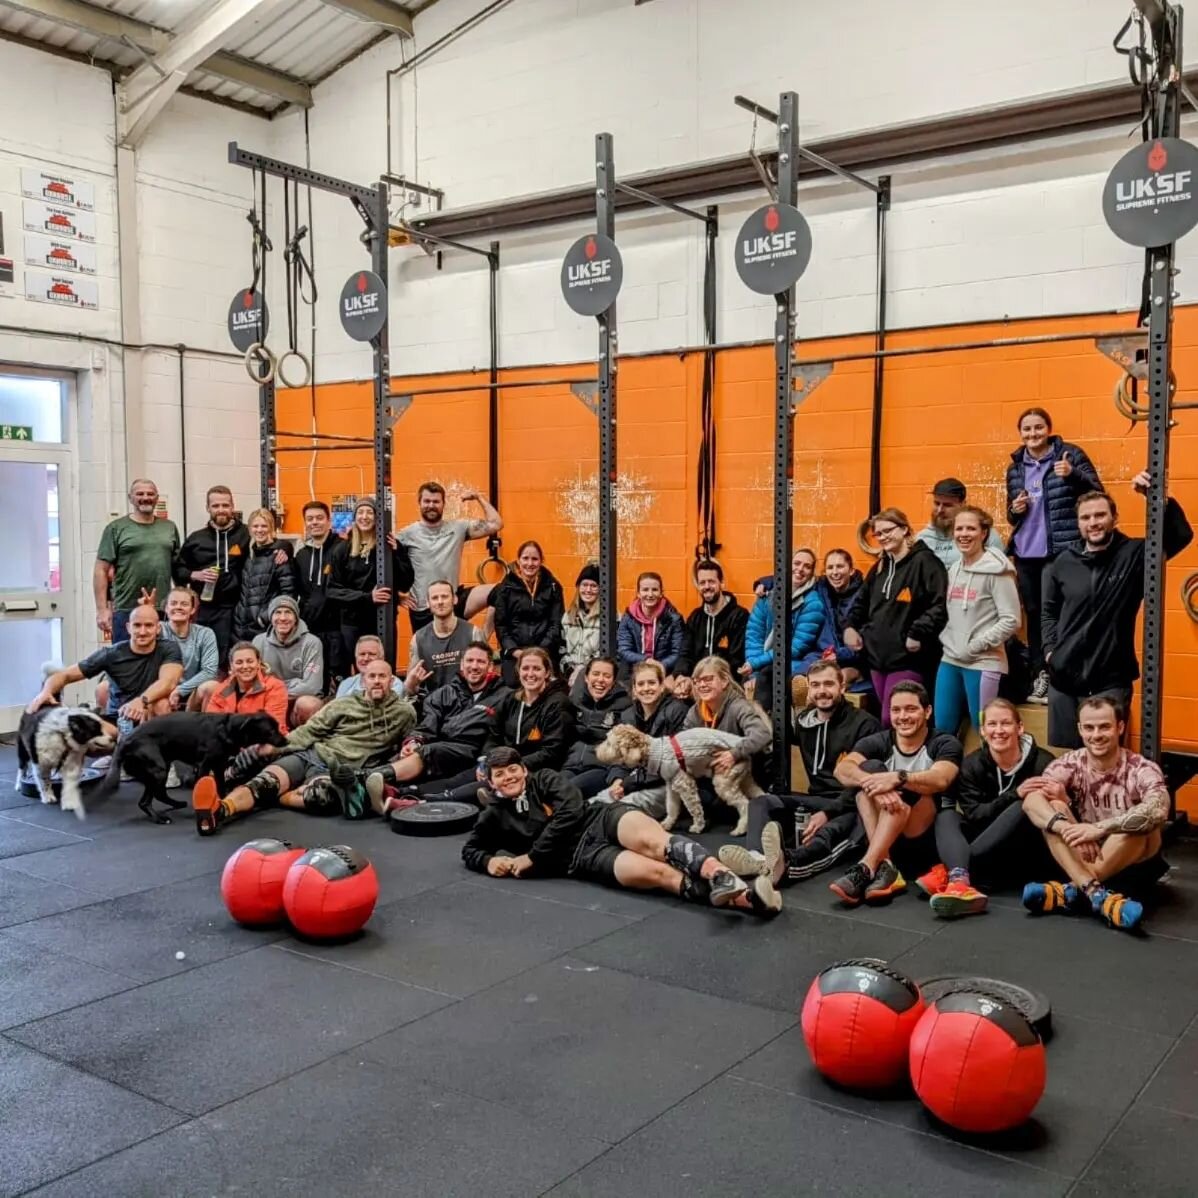 This lot though 😍 
CFBP 🧡
&pound;600 raised for MIND 💚

#charityevent #competition #community #crossfit